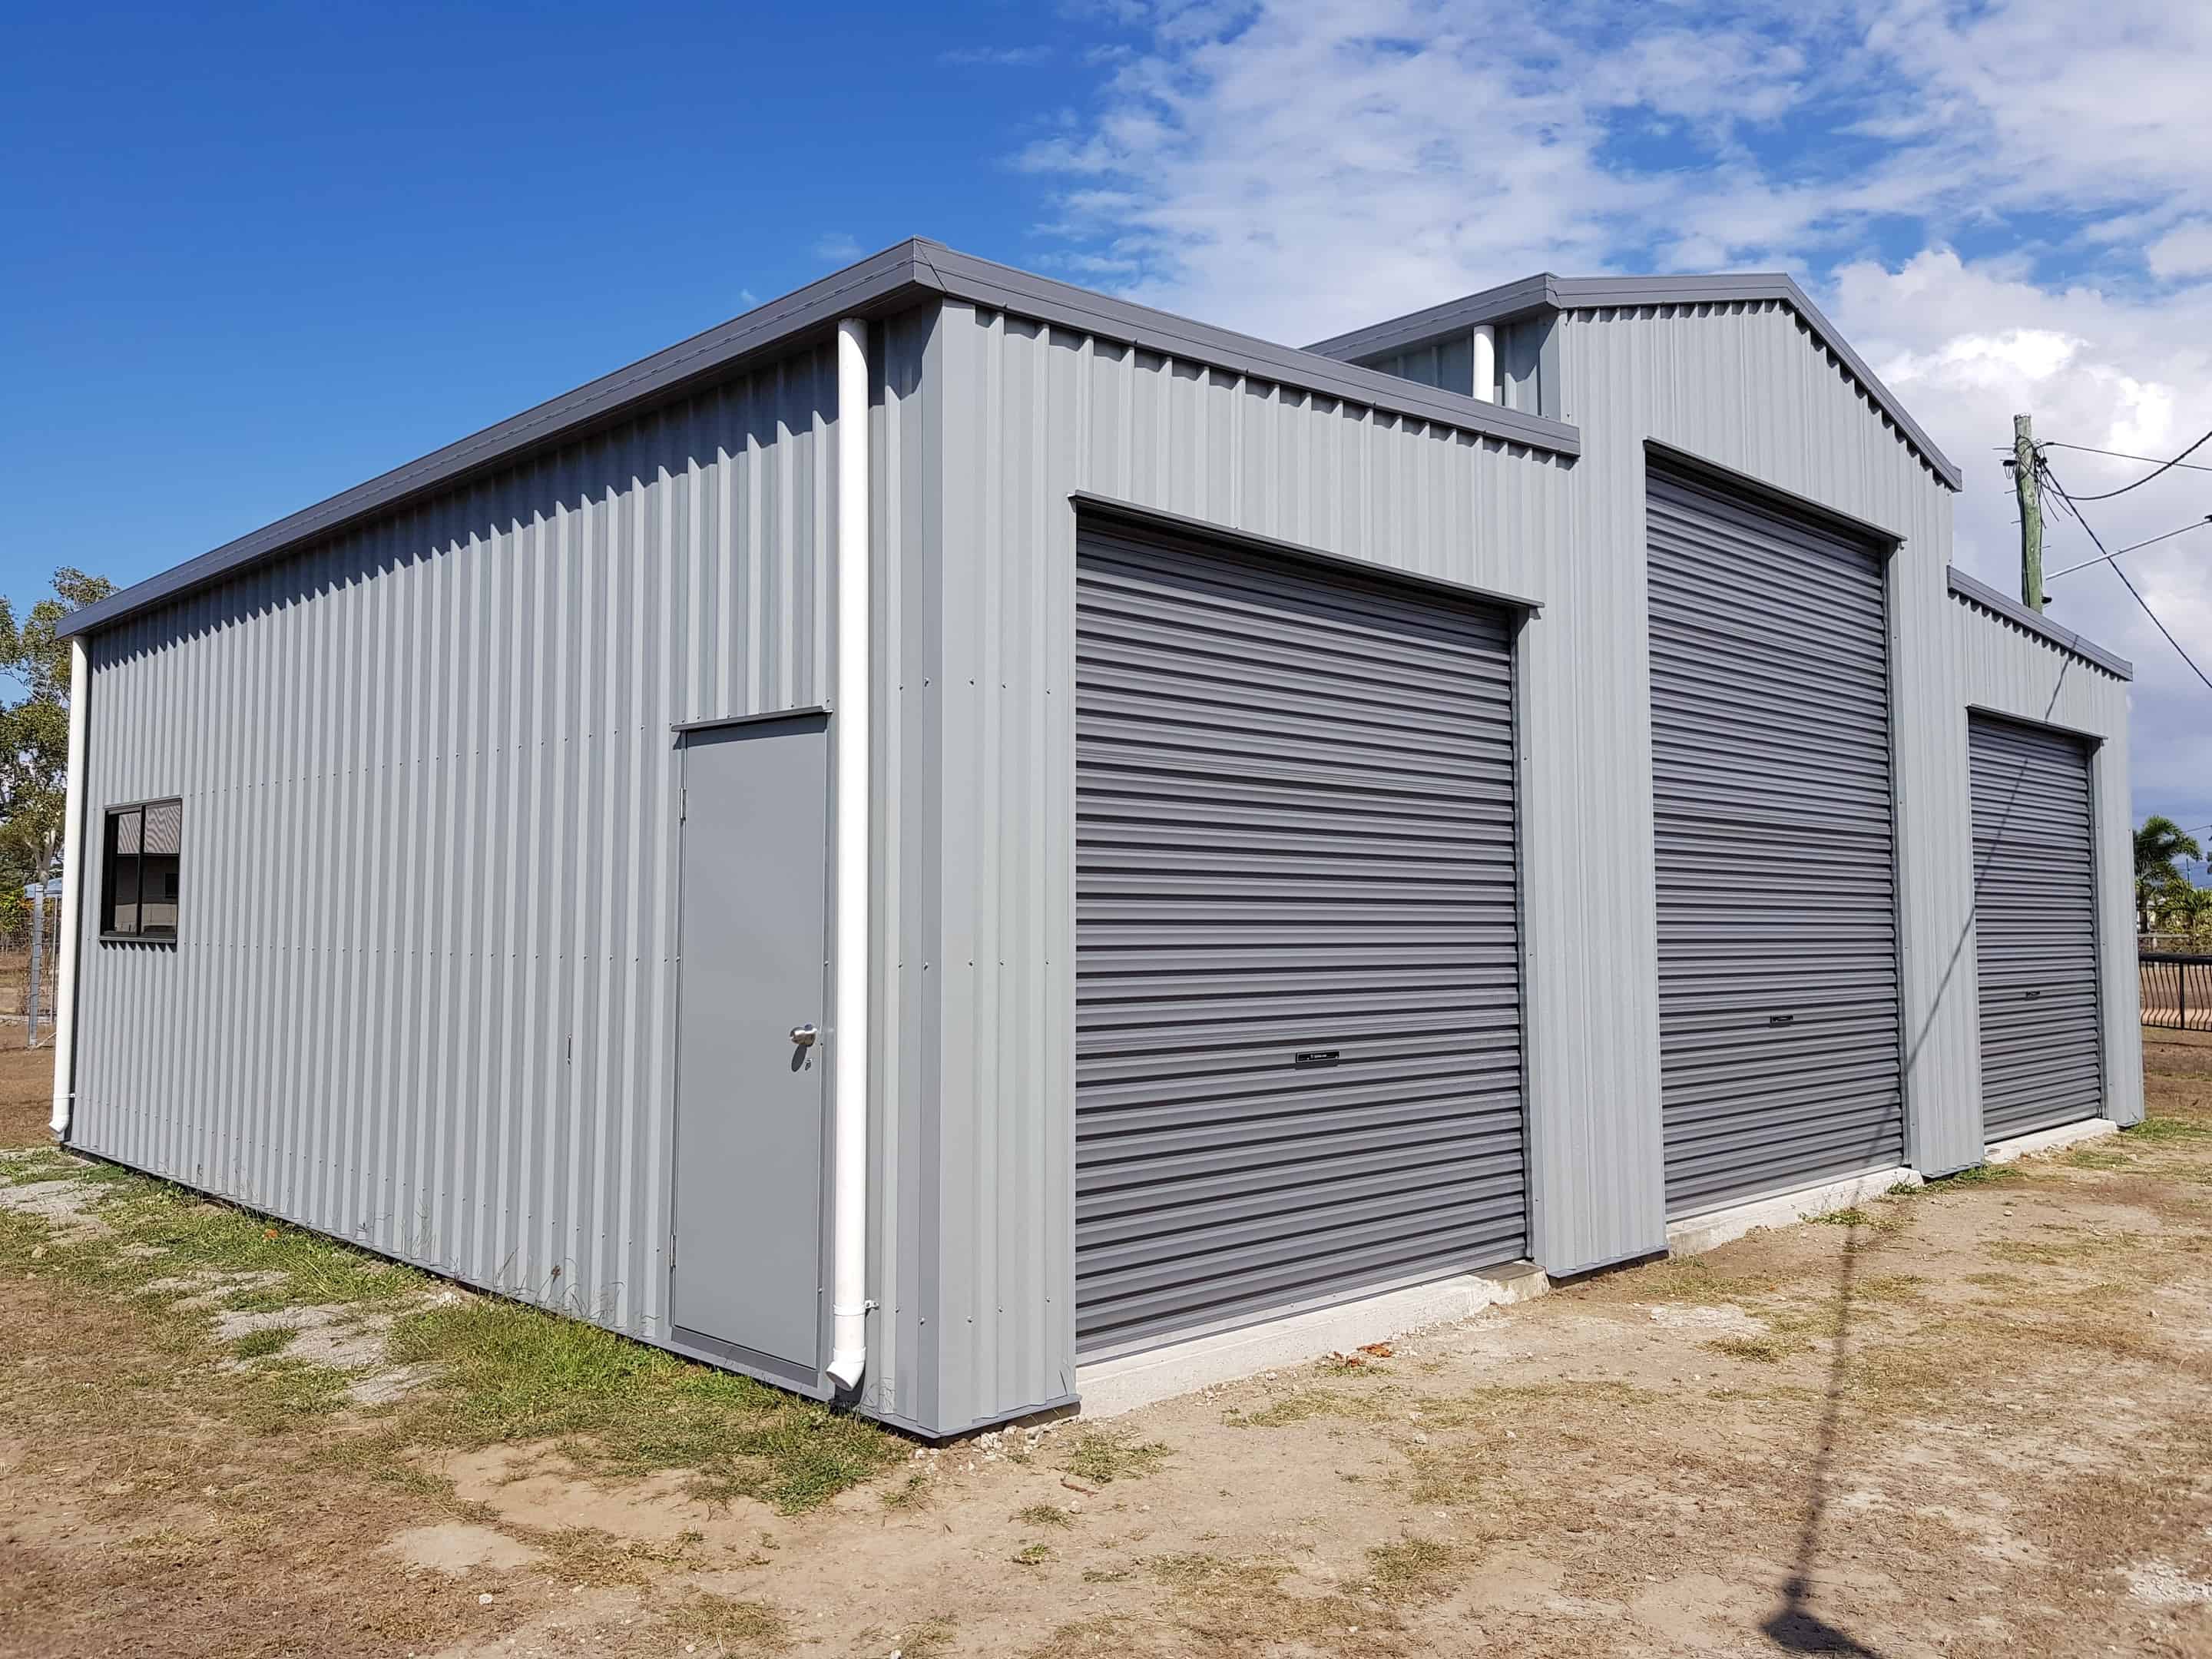 Large Triple Door Shed with Gable and Skillion Roof Design - Bryland Sheds